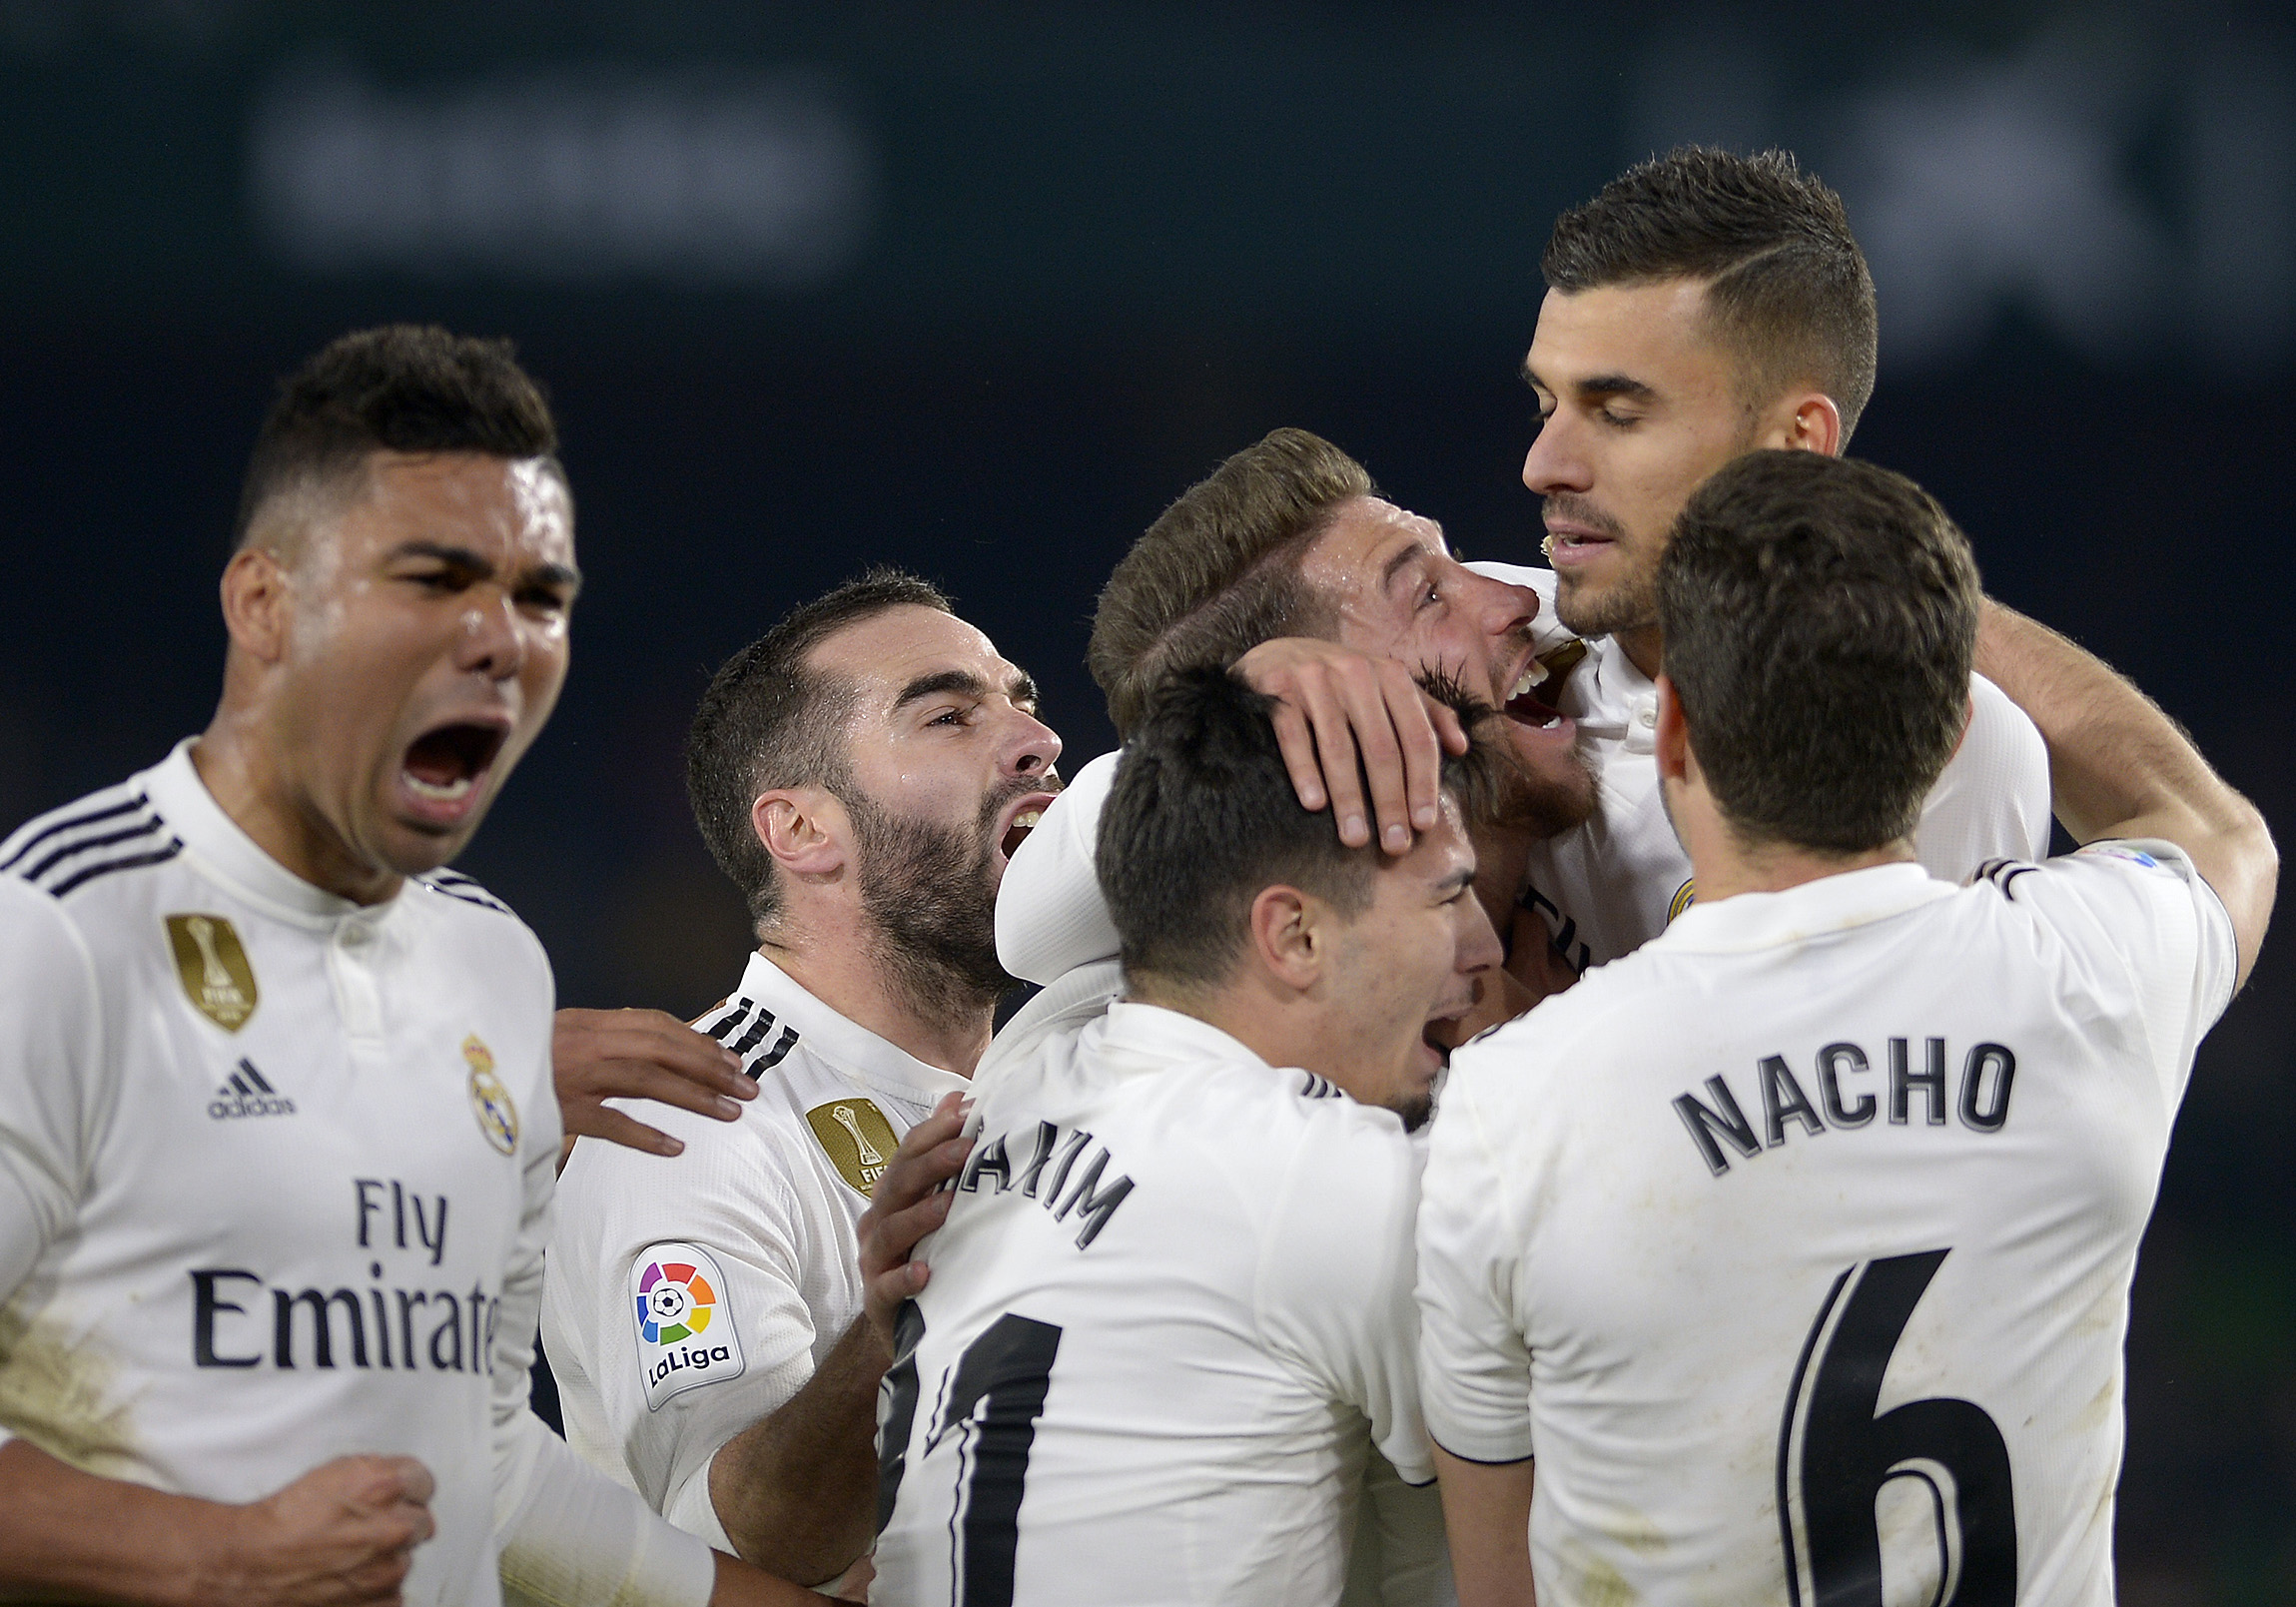 Real Madrid's Spanish midfielder Daniel Ceballos (2R) celebrates with teammates after scoring a goal during the Spanish League football match between Real Betis and Real Madrid CF at the Benito Villamarin stadium in Seville on January 13, 2019. (Photo by CRISTINA QUICLER / AFP)        (Photo credit should read CRISTINA QUICLER/AFP/Getty Images)